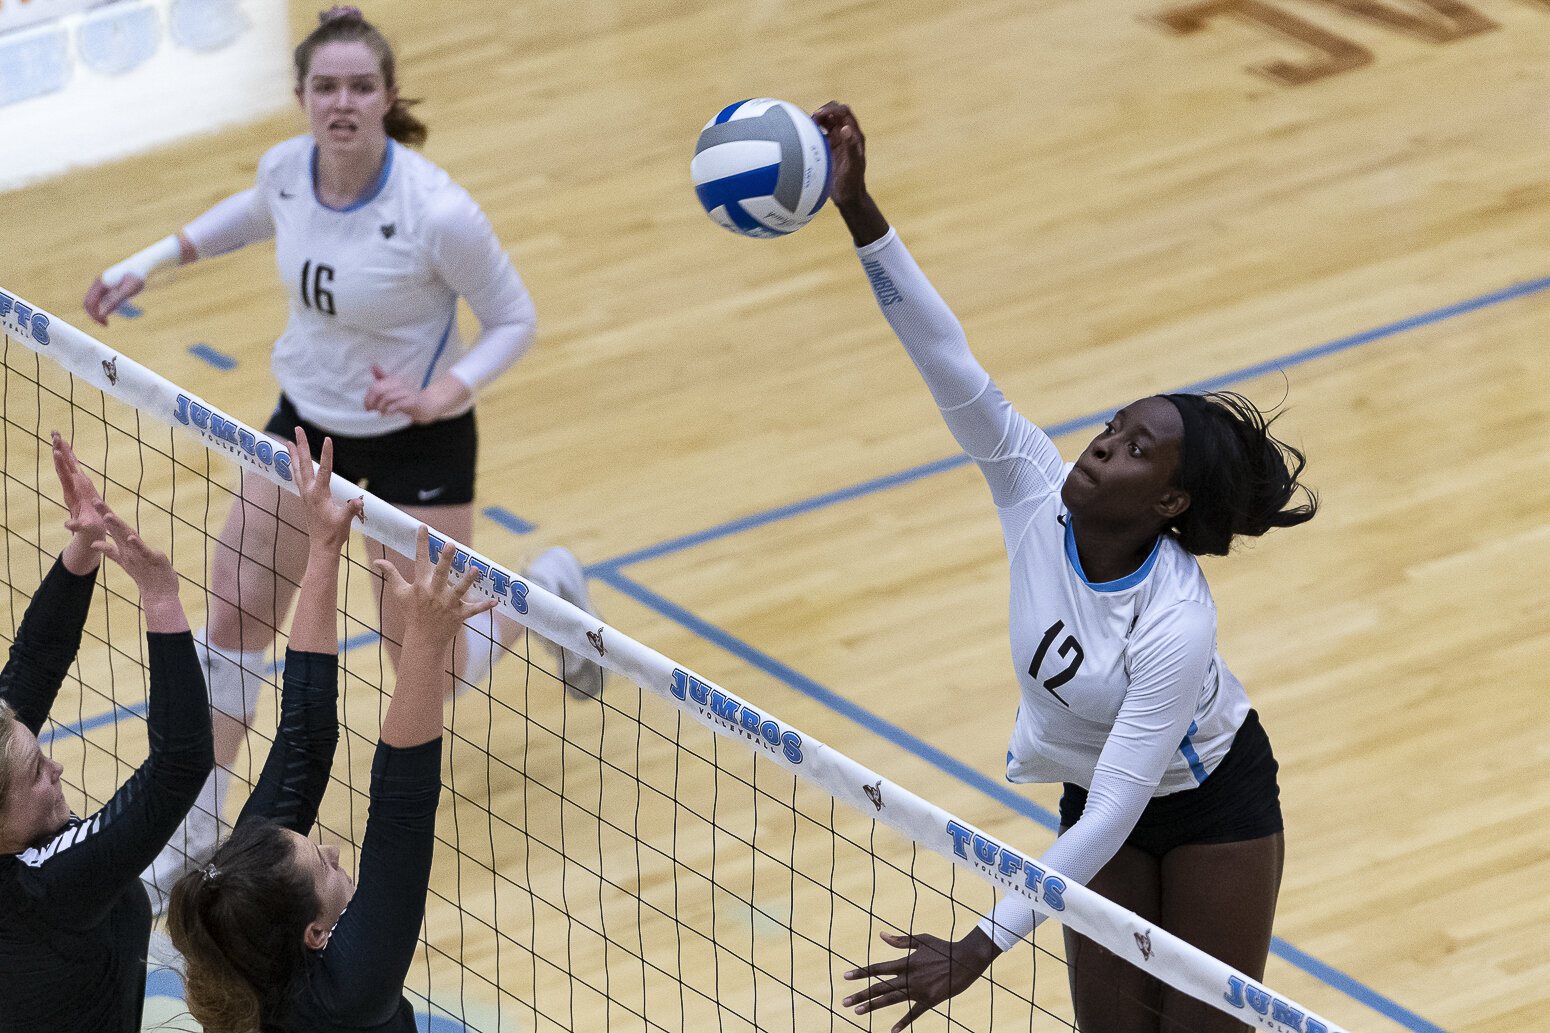 tufts_womans_volleyball -1.jpg